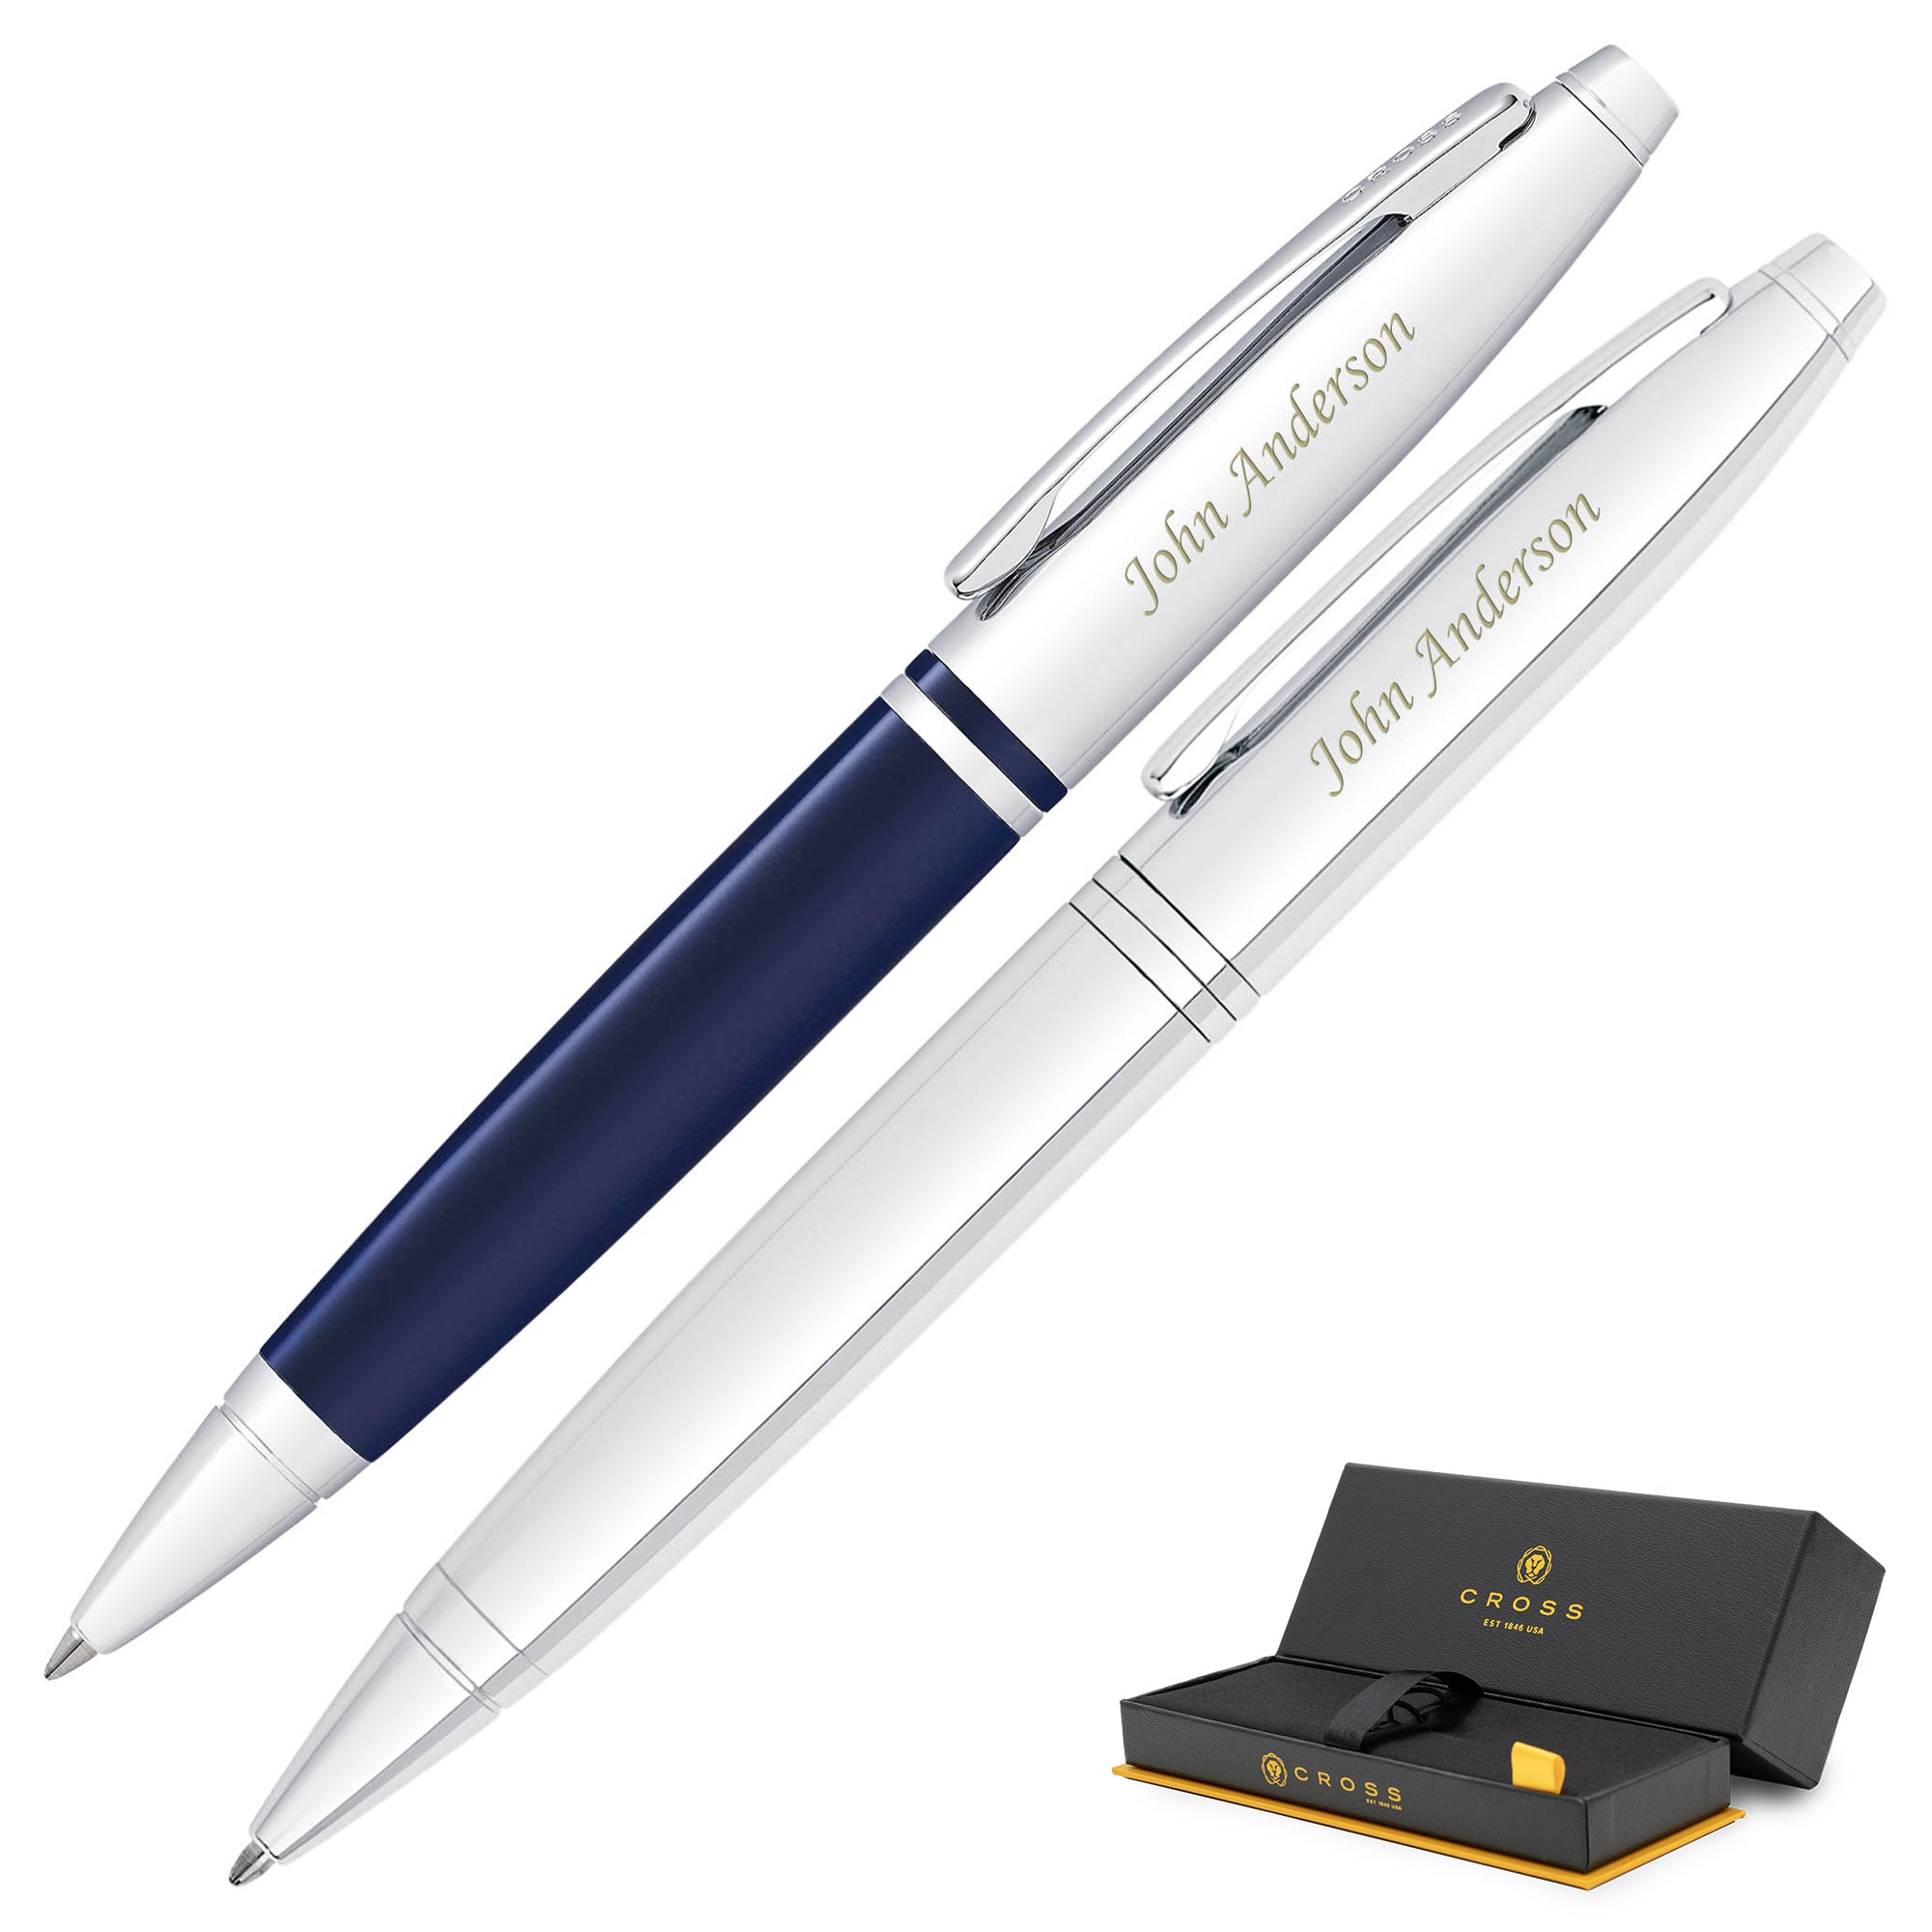 Buy SAVRIPersonalized PC Black Slim Ball Point Pen - Name and Small Message  Engraved on Case. Suitable for Corporates. Ideal Gift for Rakshabandhan,  Latest Rakhi Gift for Brother and Sister. Online at